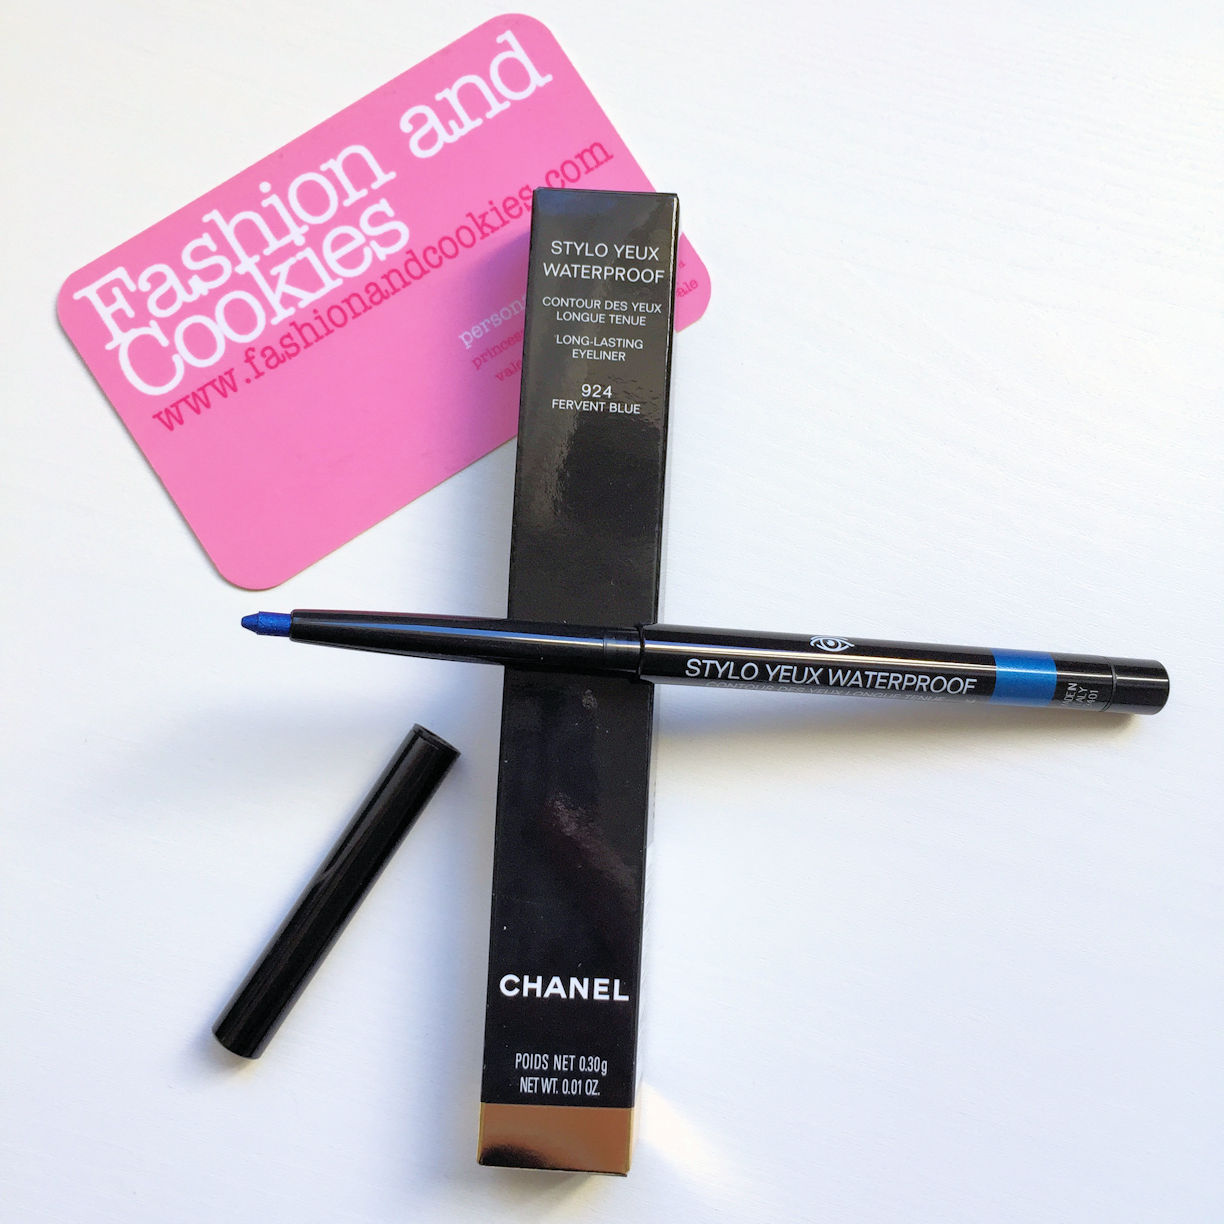 Chanel Stylo Yeux Waterproof in fervent blue from Chanel LA Sunrise collection on Fashion and Cookies fashion and beauty blog, beauty blogger